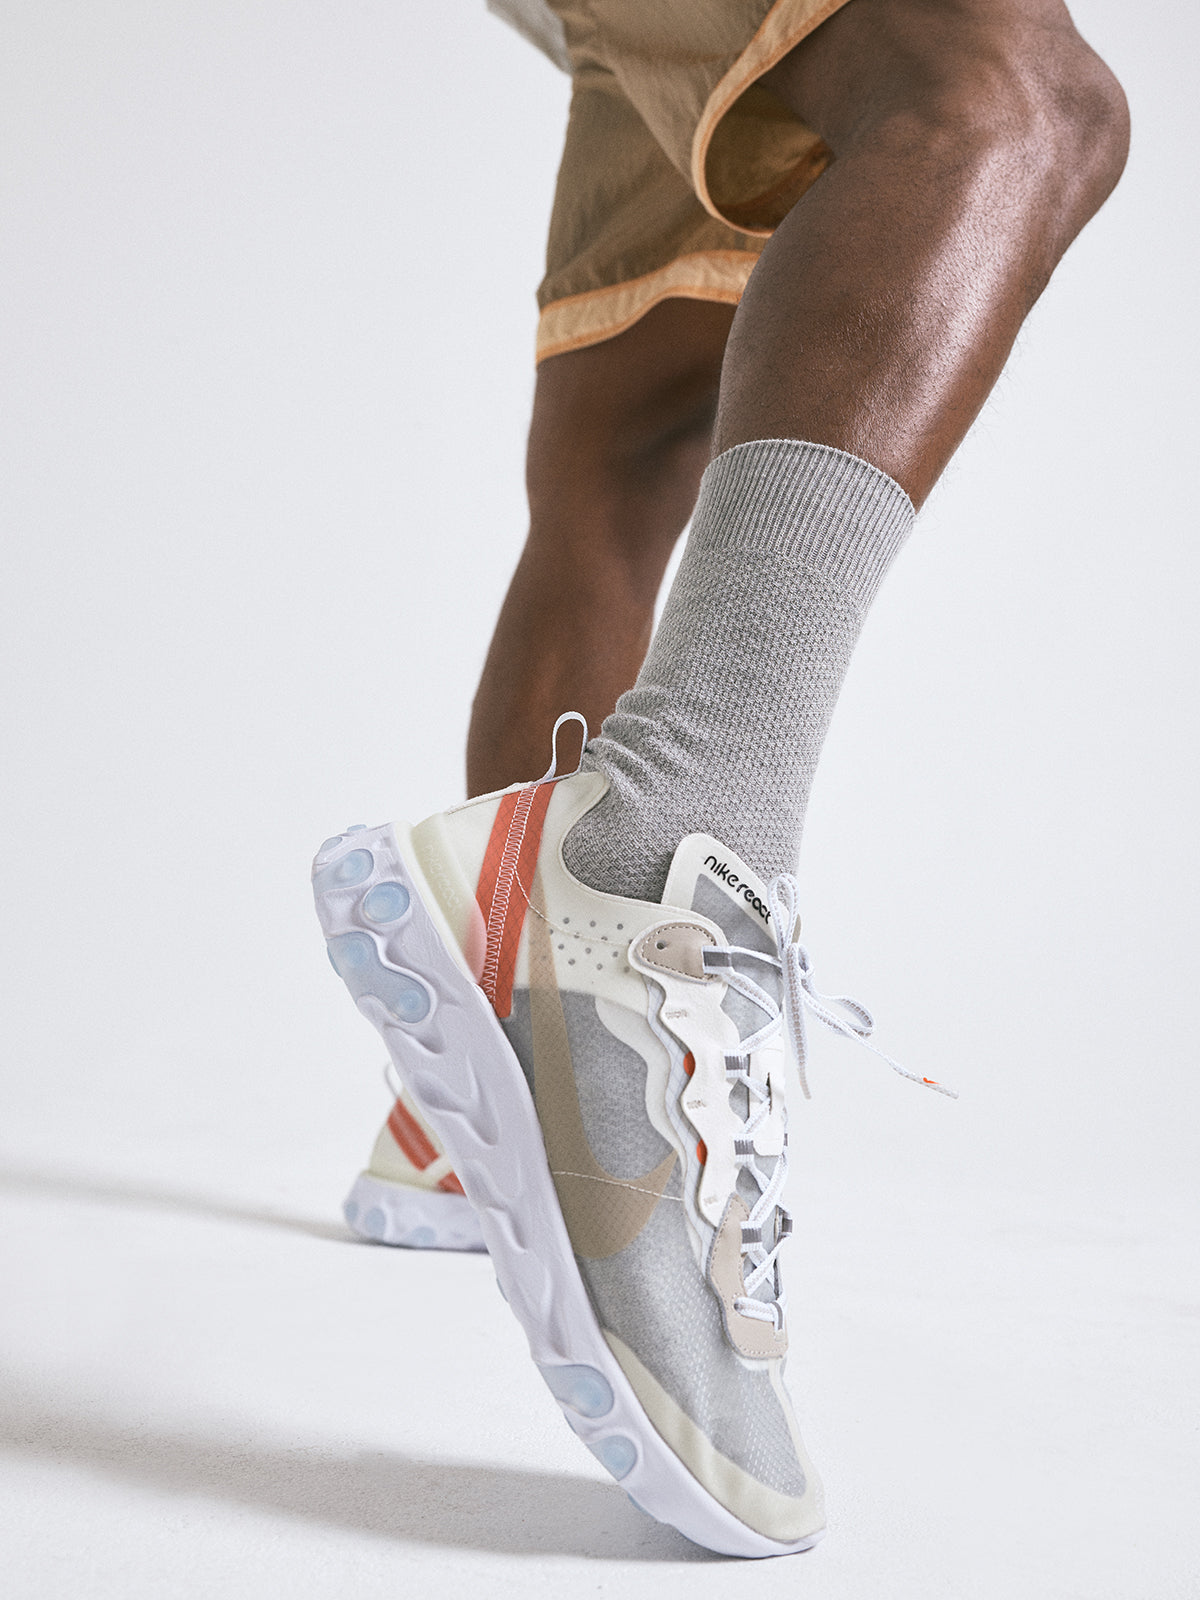 Editorial for the Nike Element 87